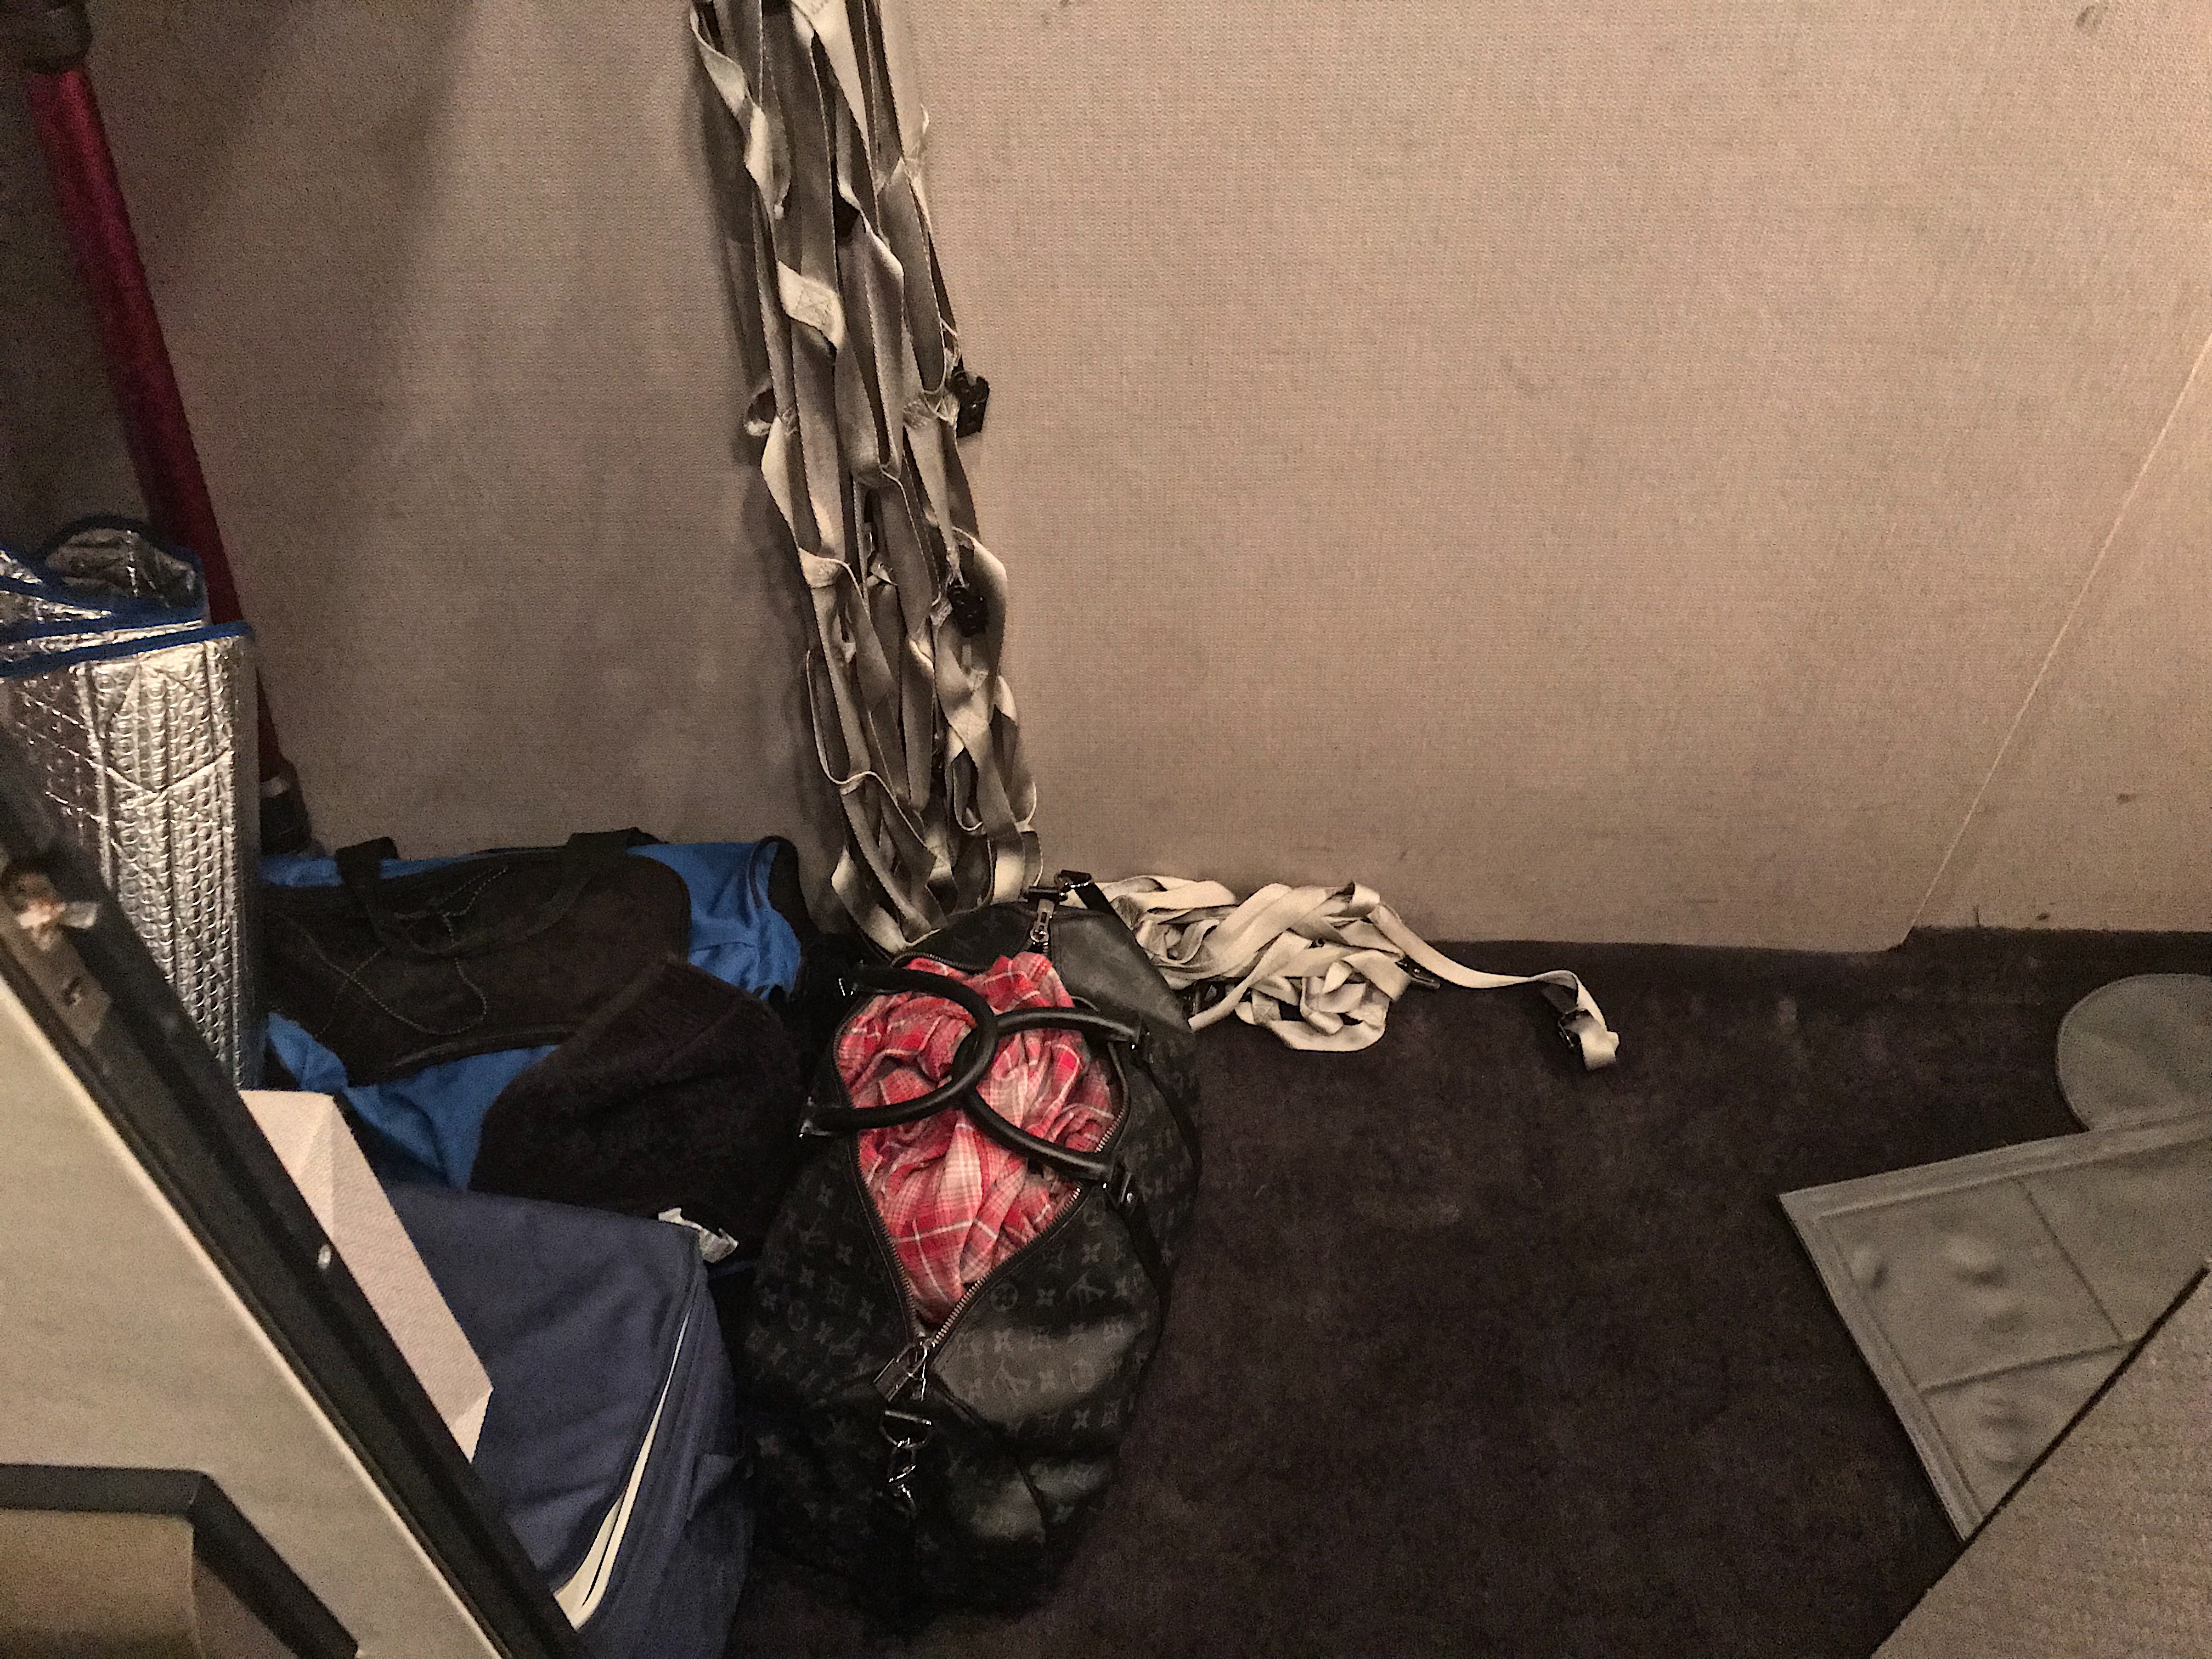 a bag and luggage in a room